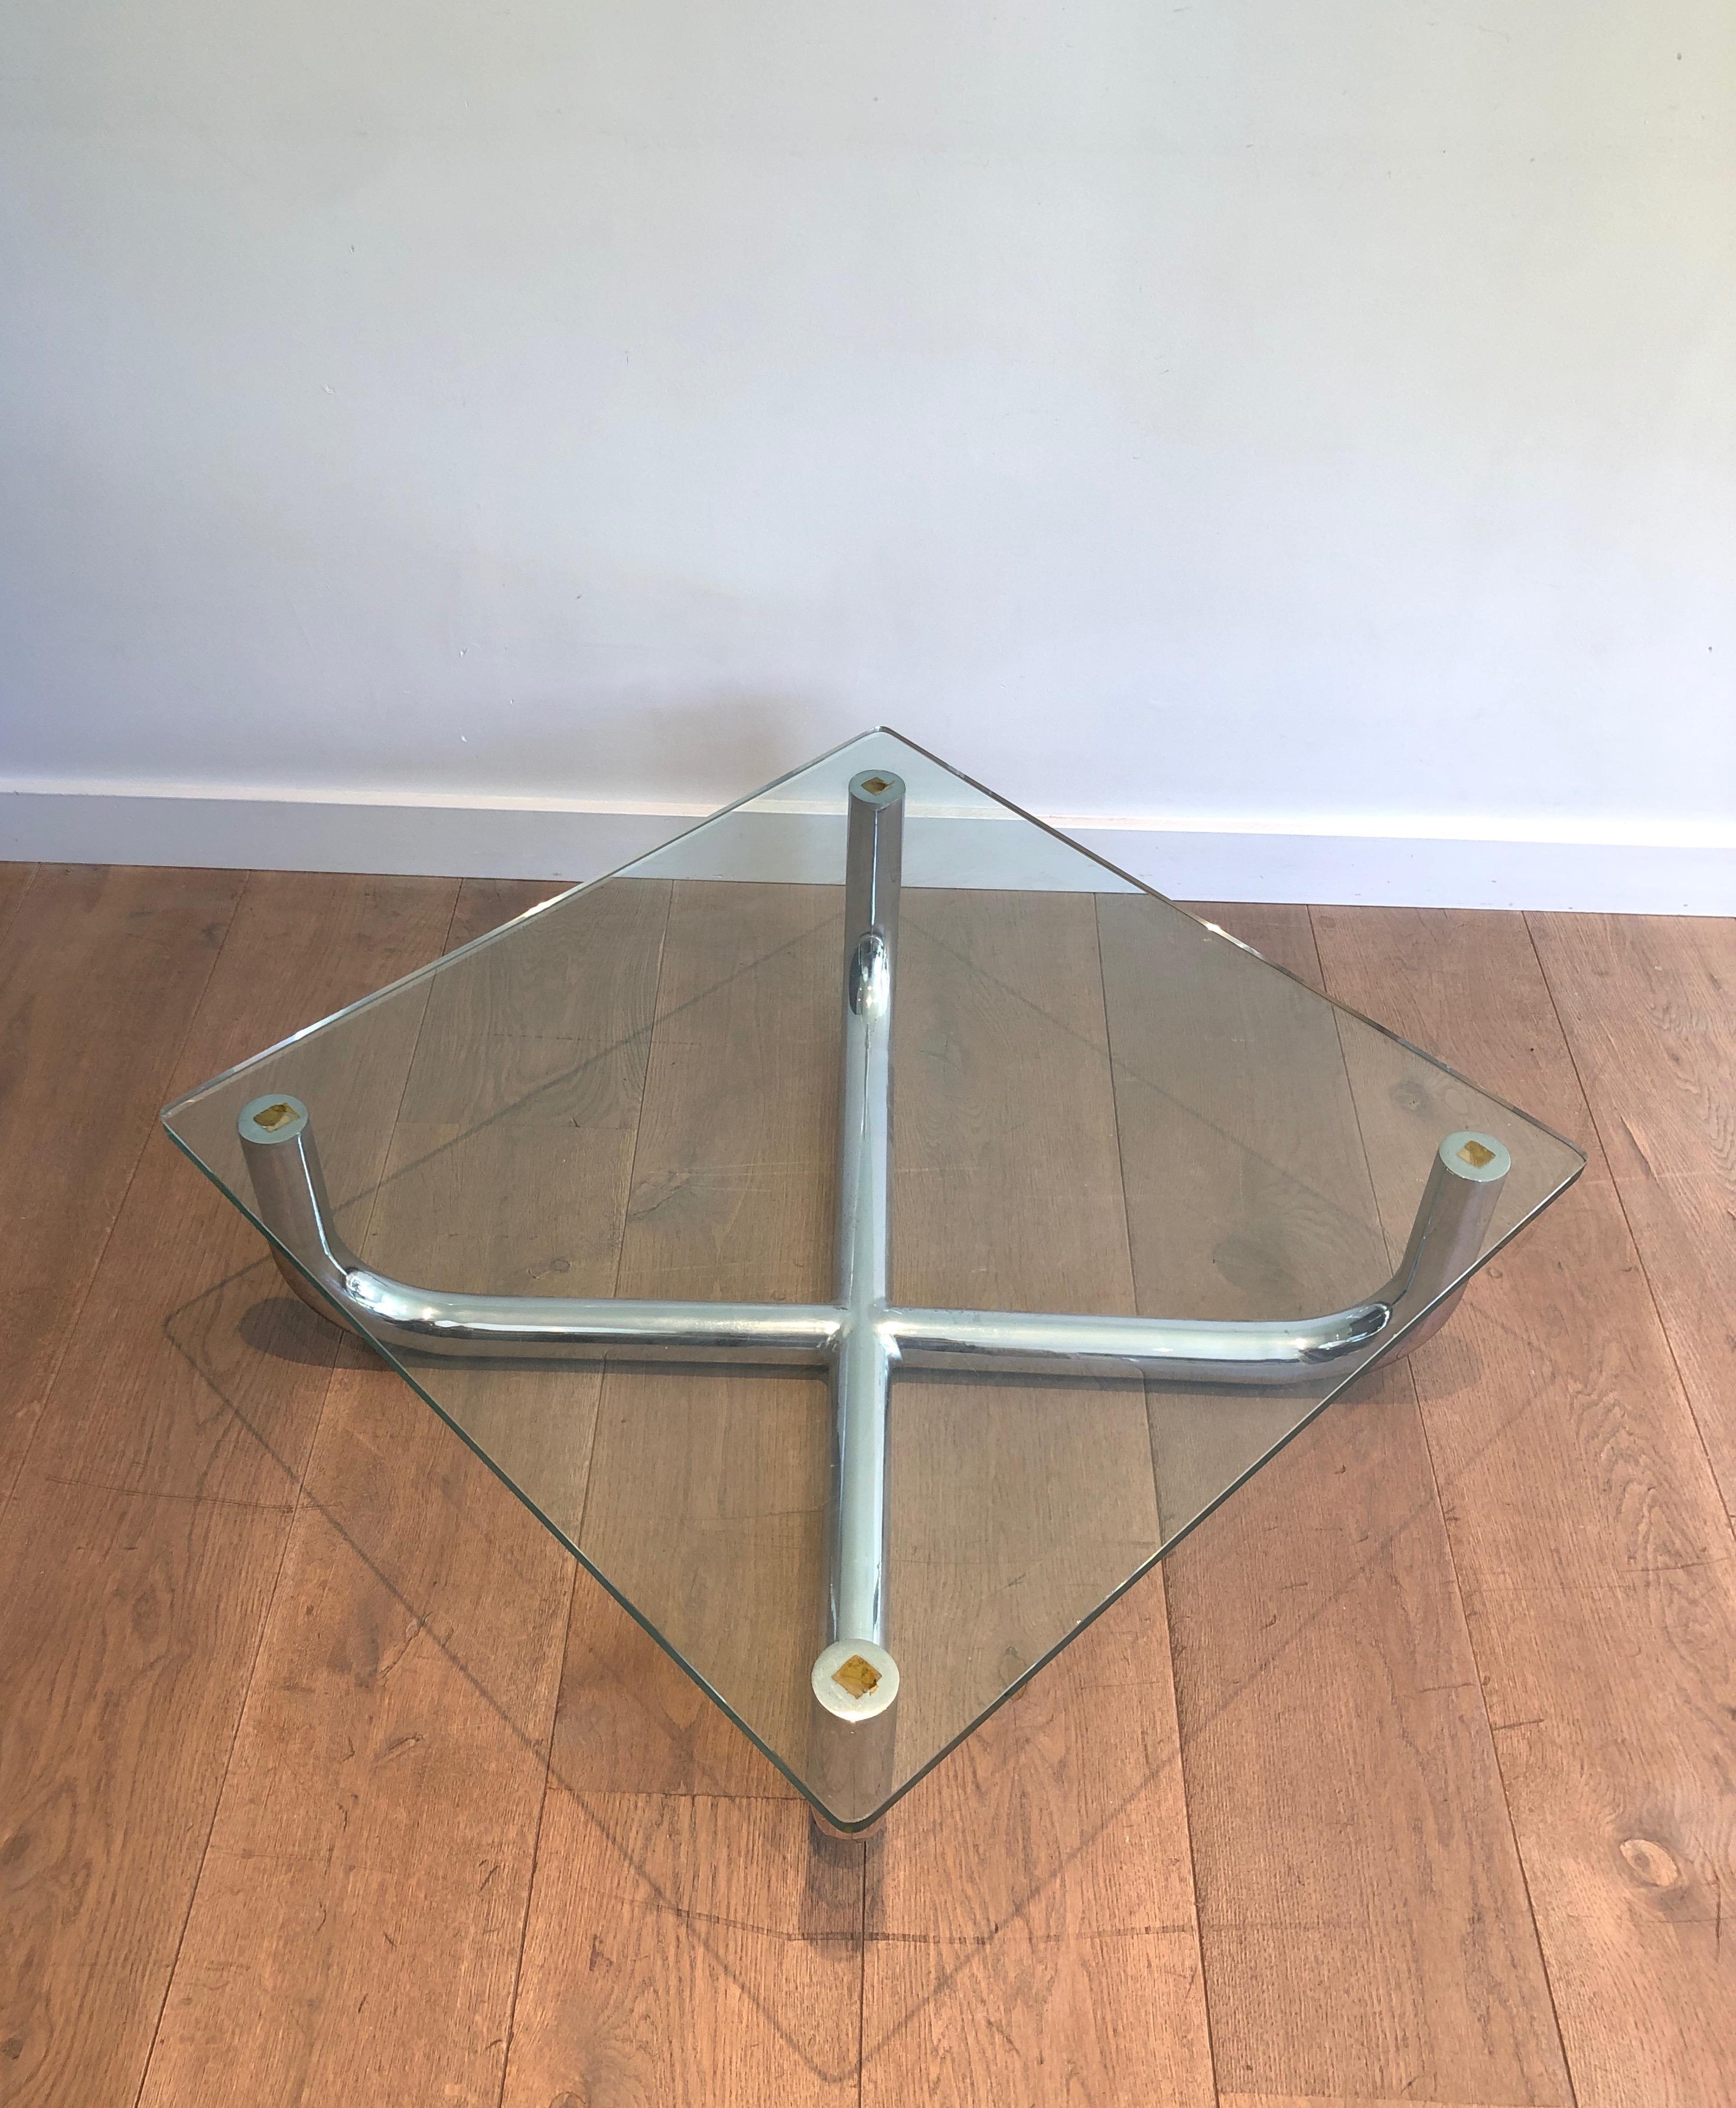 Chromed Coffee Table with Glass Shelf, French Work, Circa 1970 For Sale 6